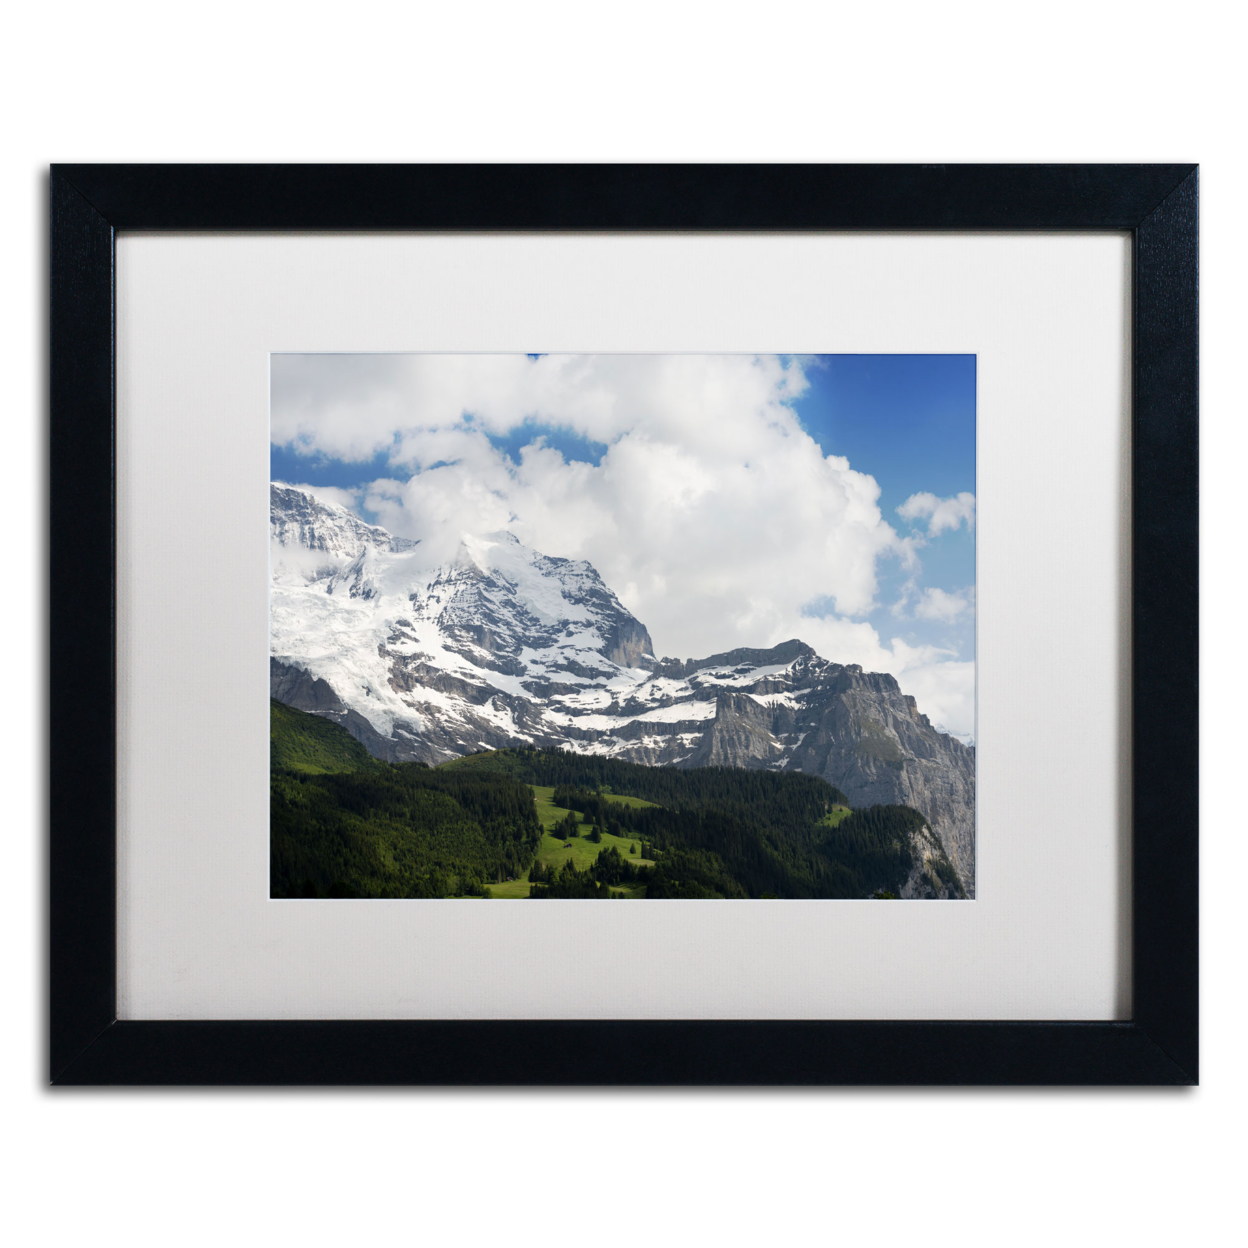 Philippe Sainte-Laudy 'Peace In Switzerland' Black Wooden Framed Art 18 X 22 Inches